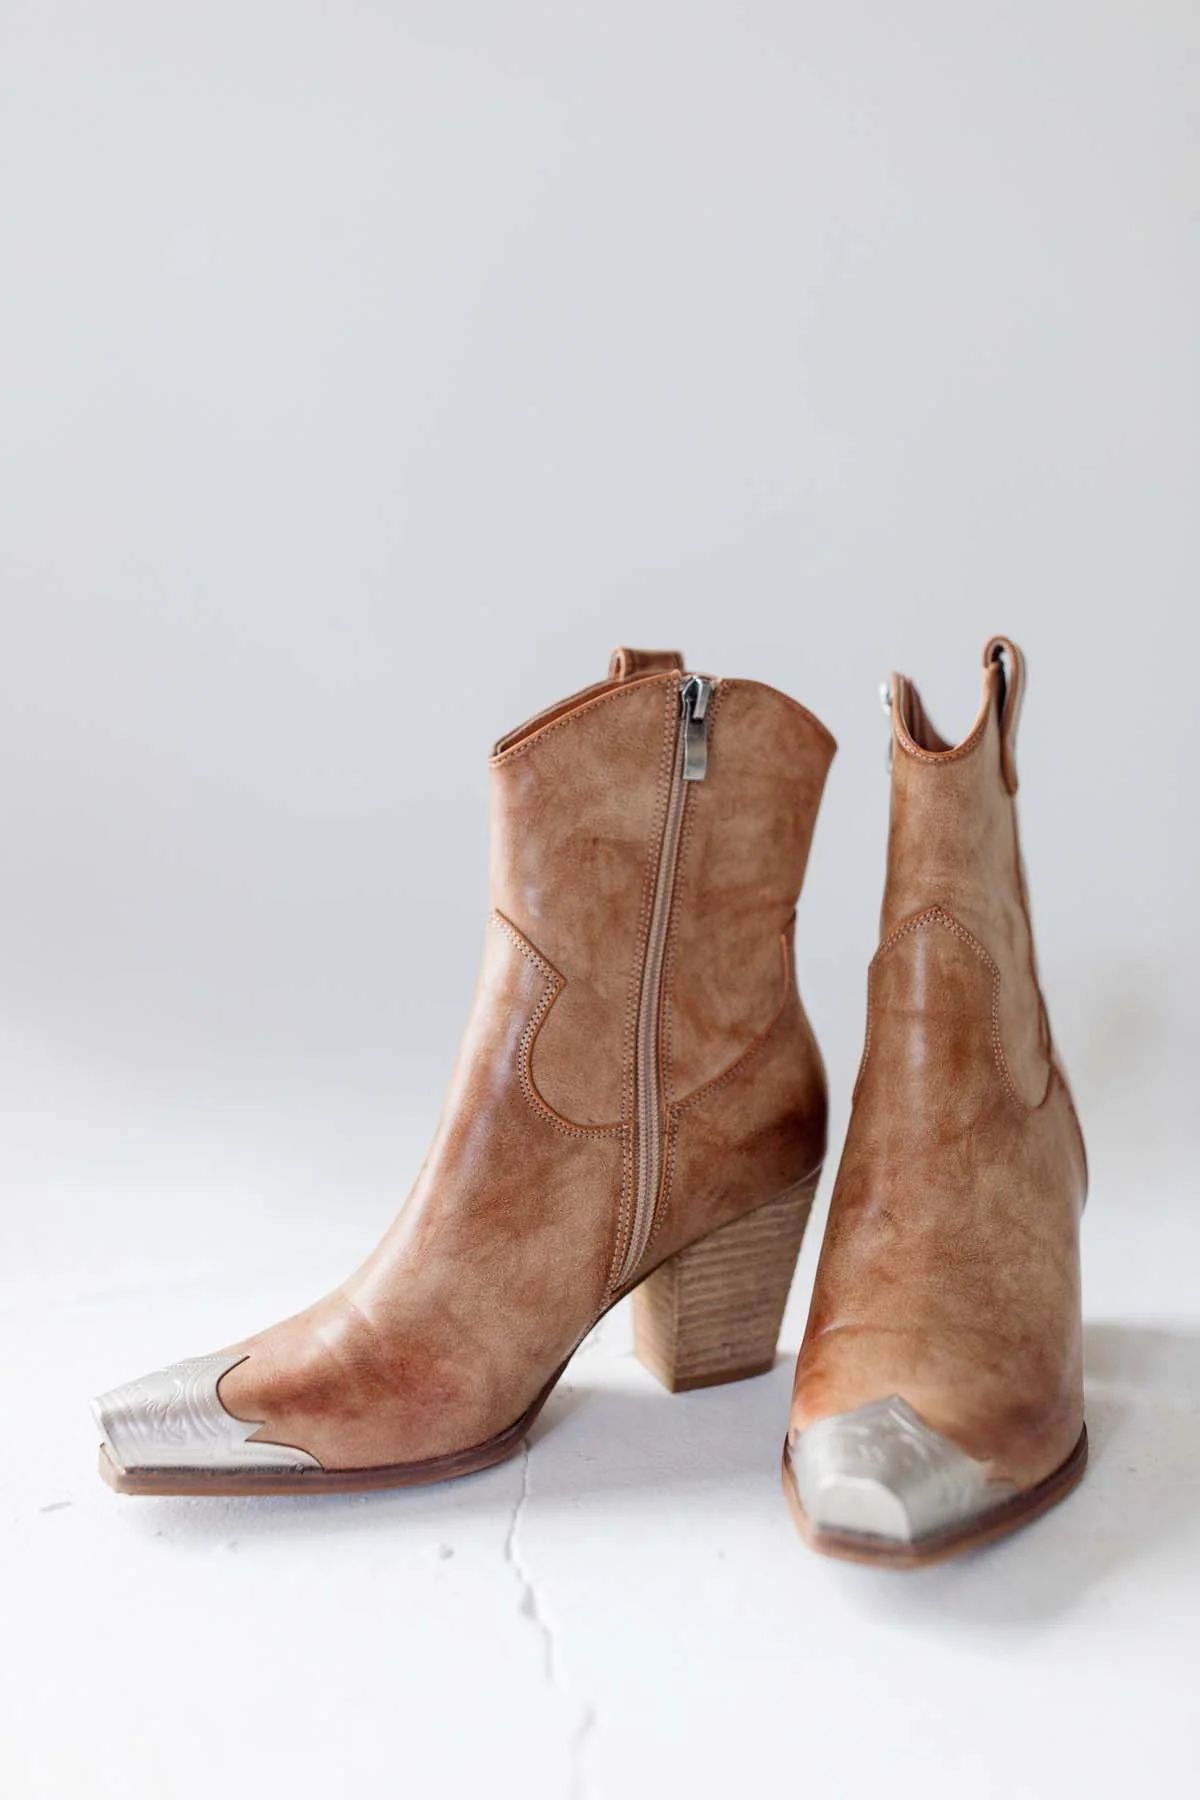 Ollie Tan Booties | The Post